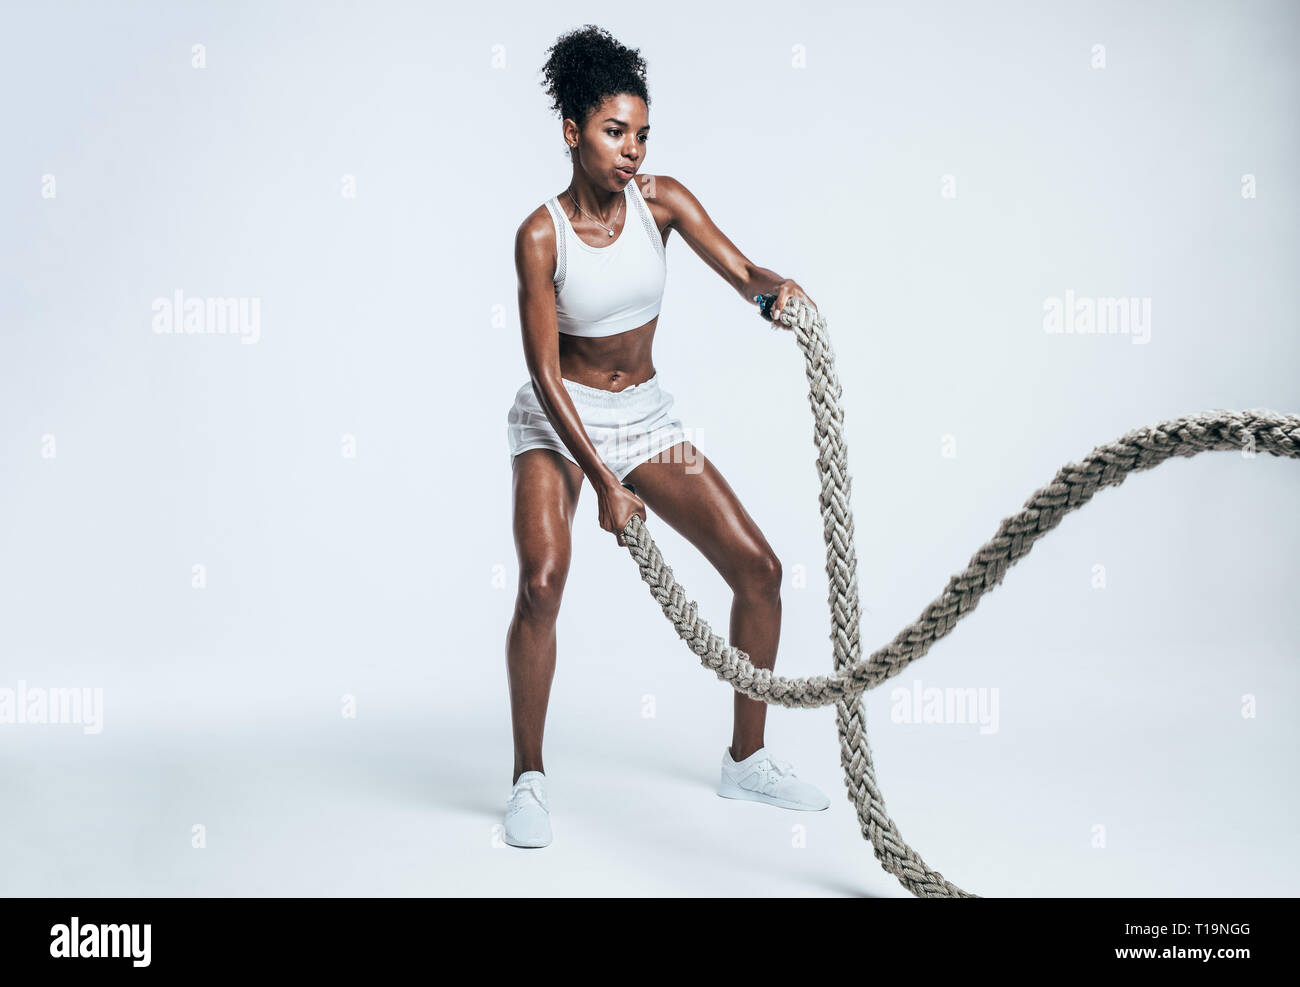 Fitness woman using training ropes for exercises. Athlete working out with battle ropes on white background. Stock Photo